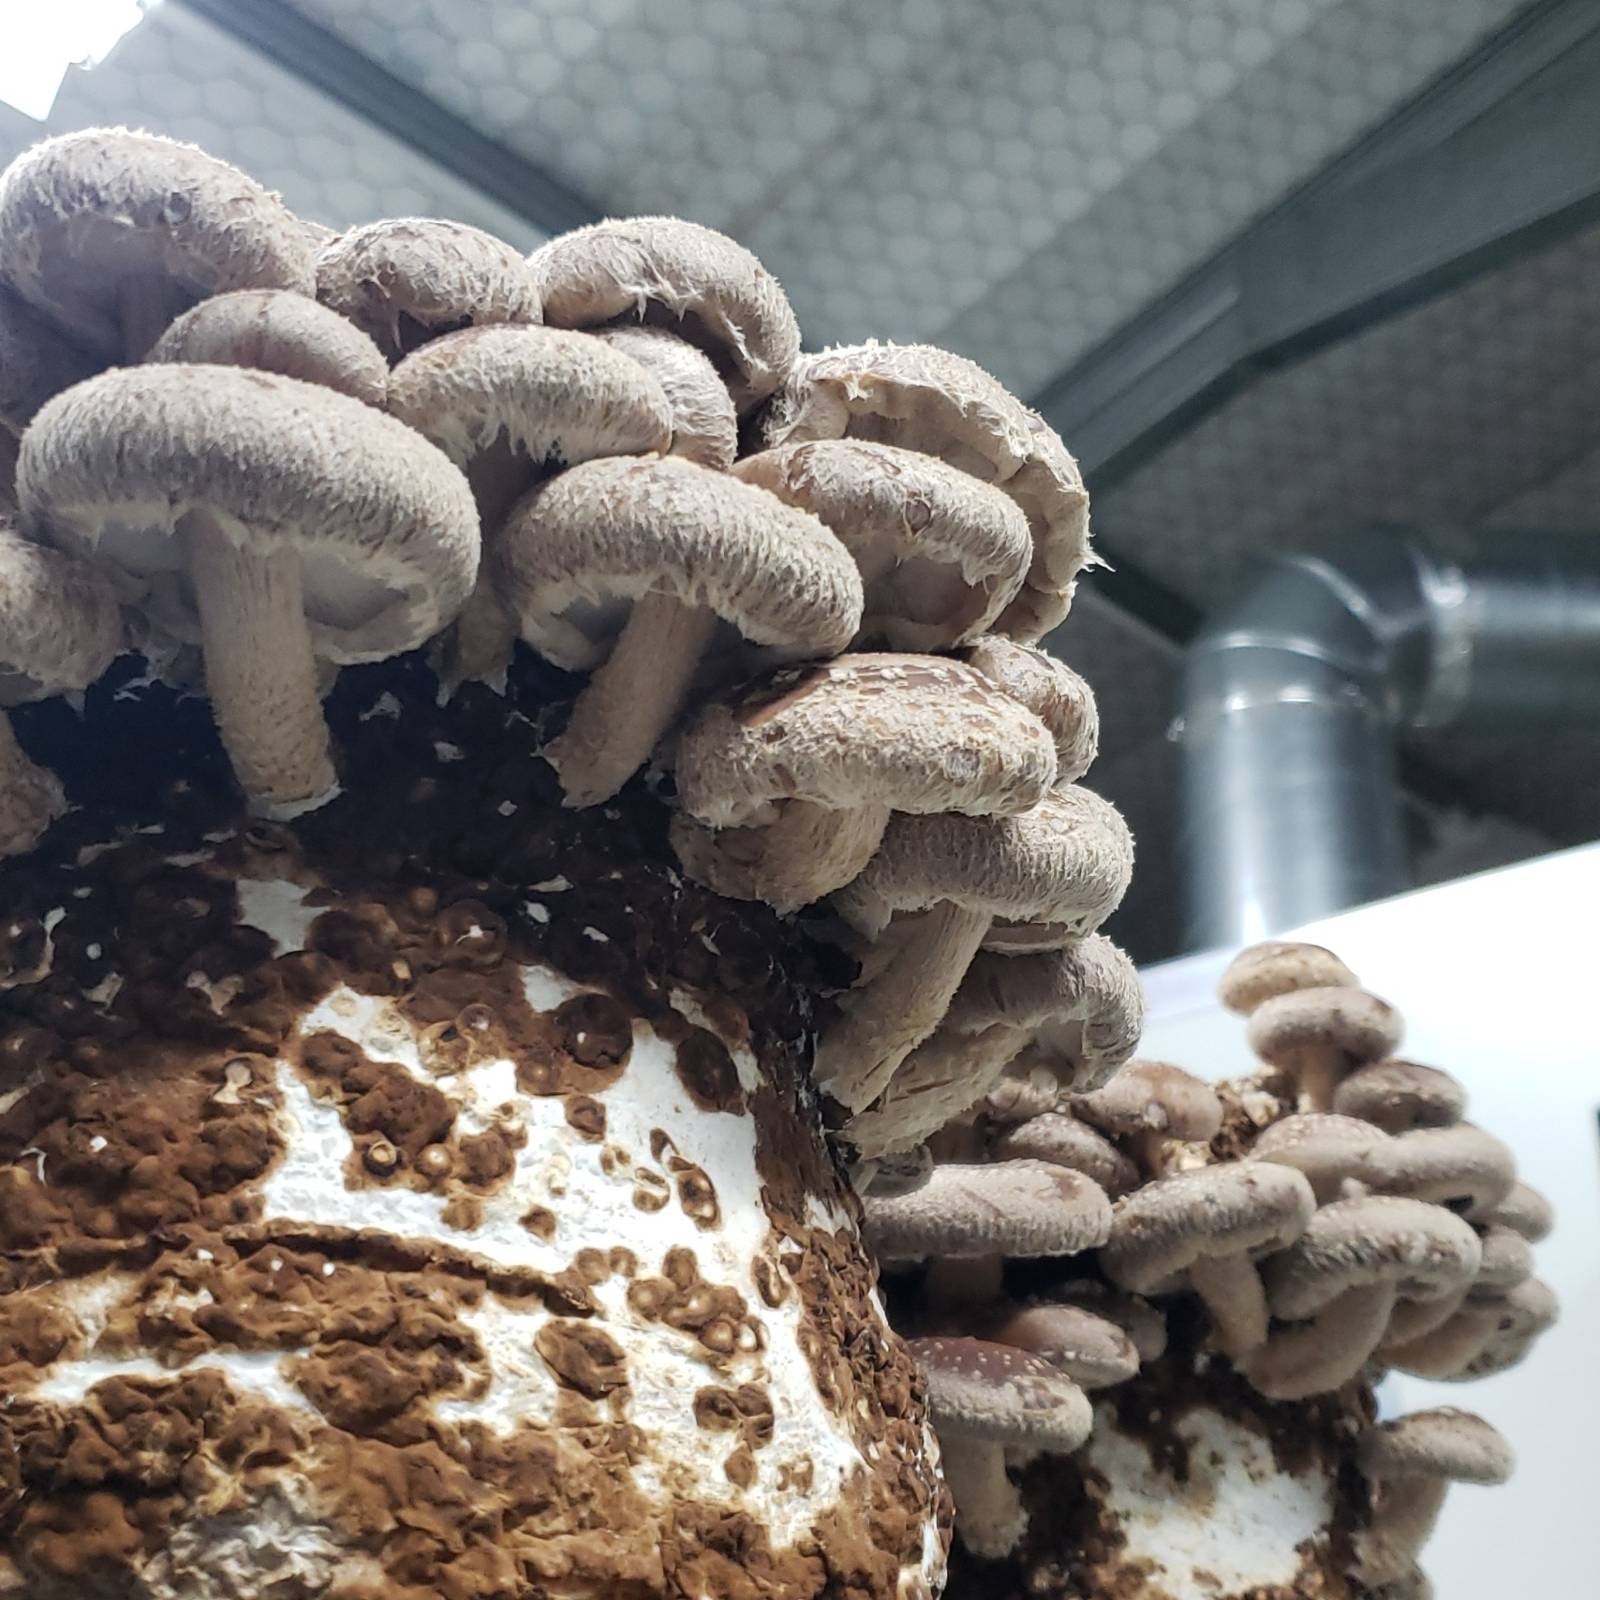 shiitake mushrooms growing off a substrate of sawdust and wheat bran